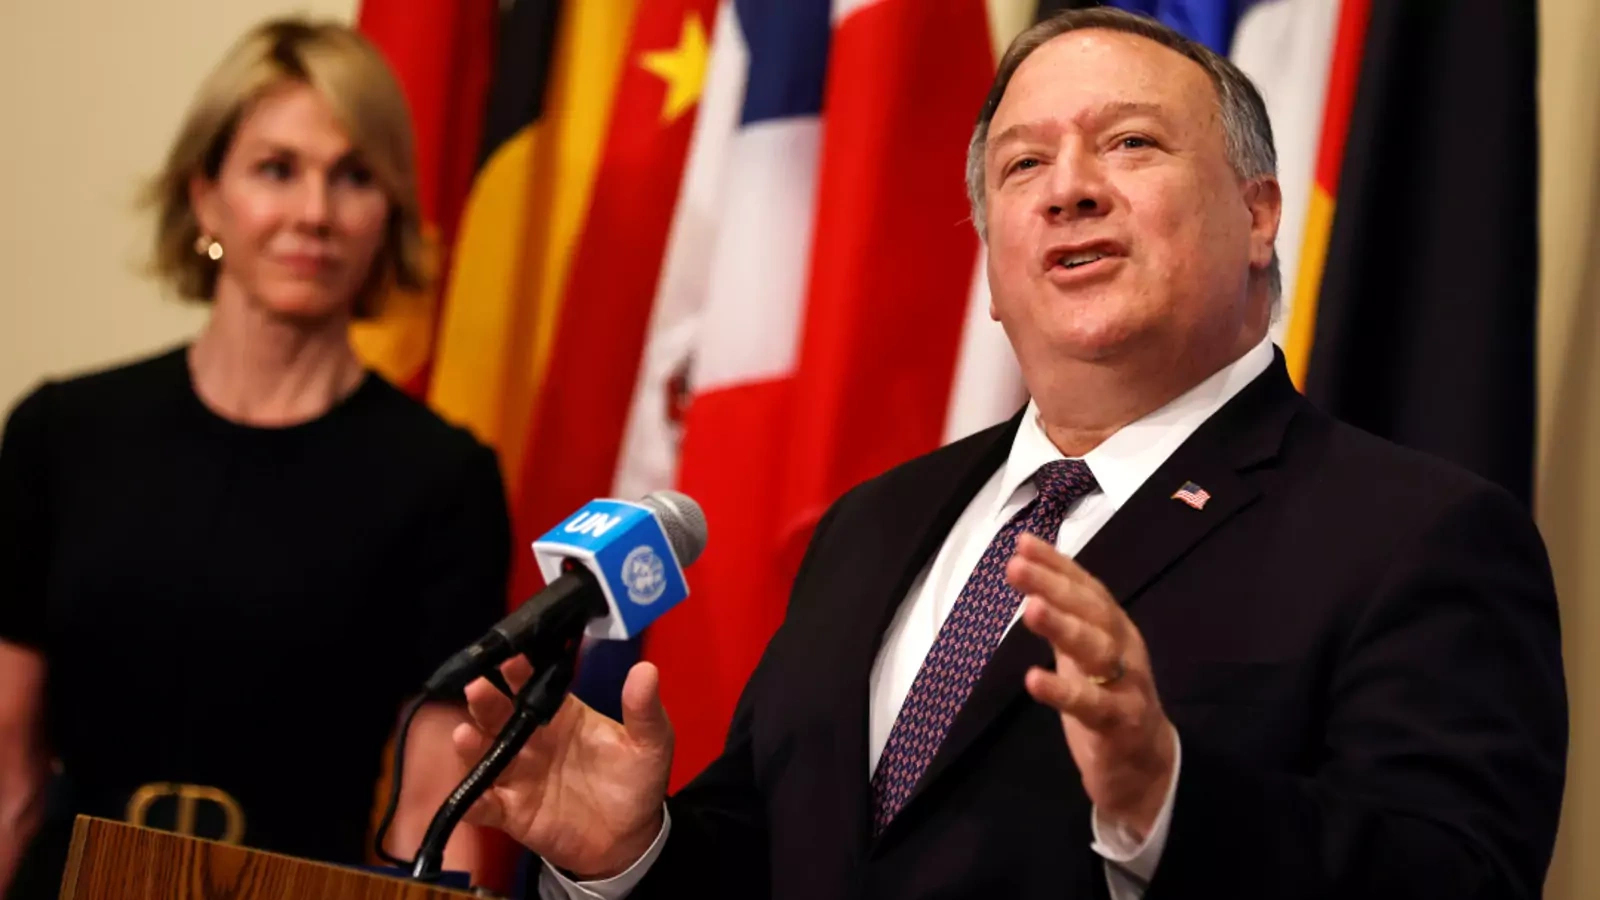 U.S. Secretary of State Mike Pompeo speaks to reporters following a meeting with members of the UN Security Council.